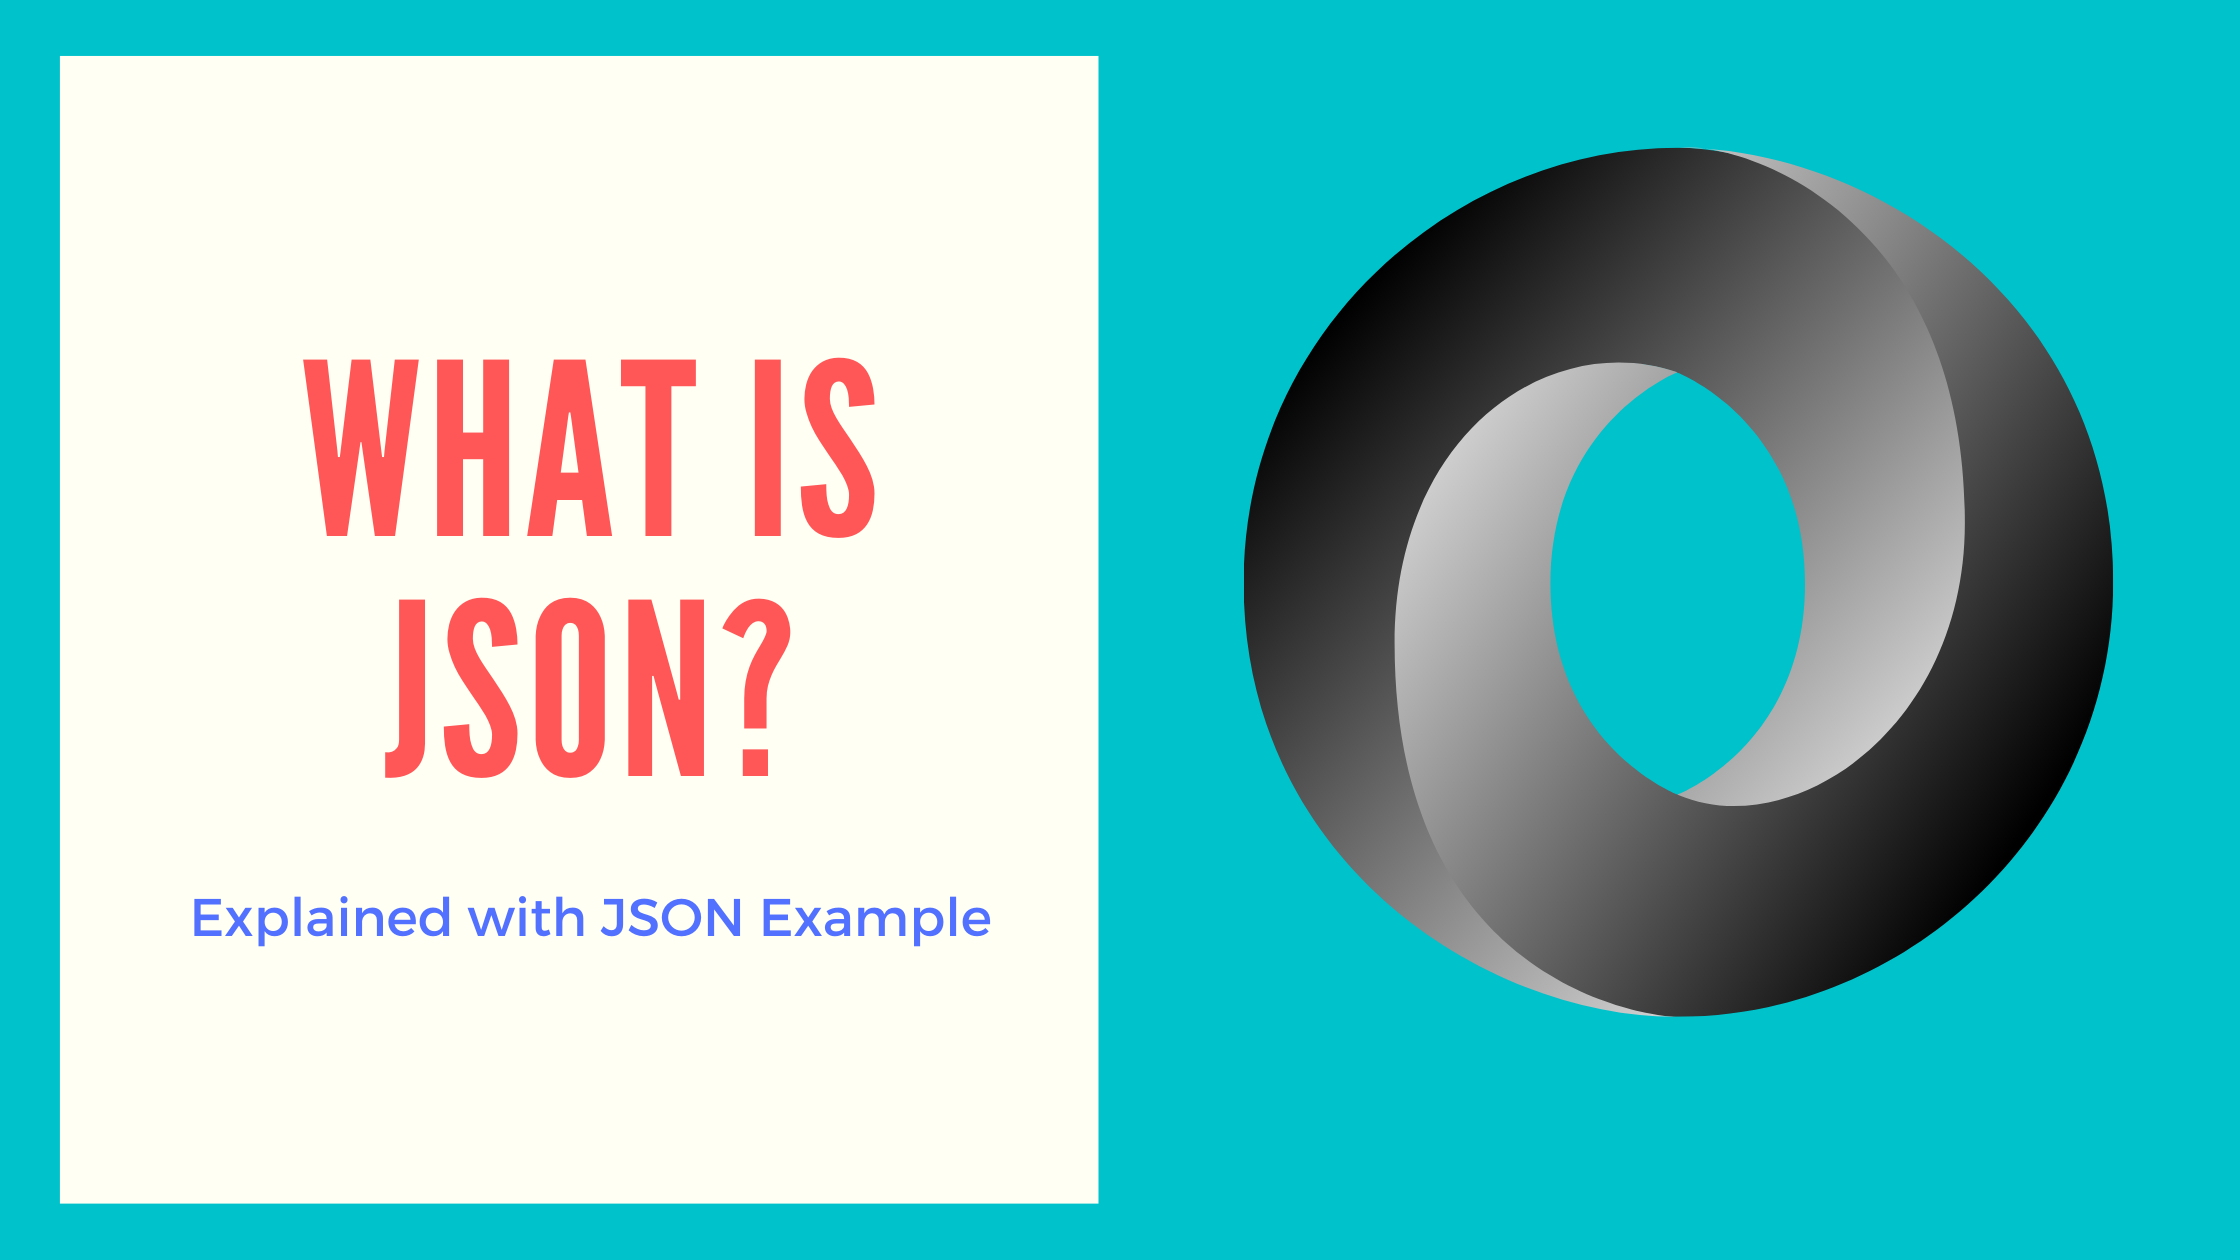 What is JSON? Explained with JSON Examples